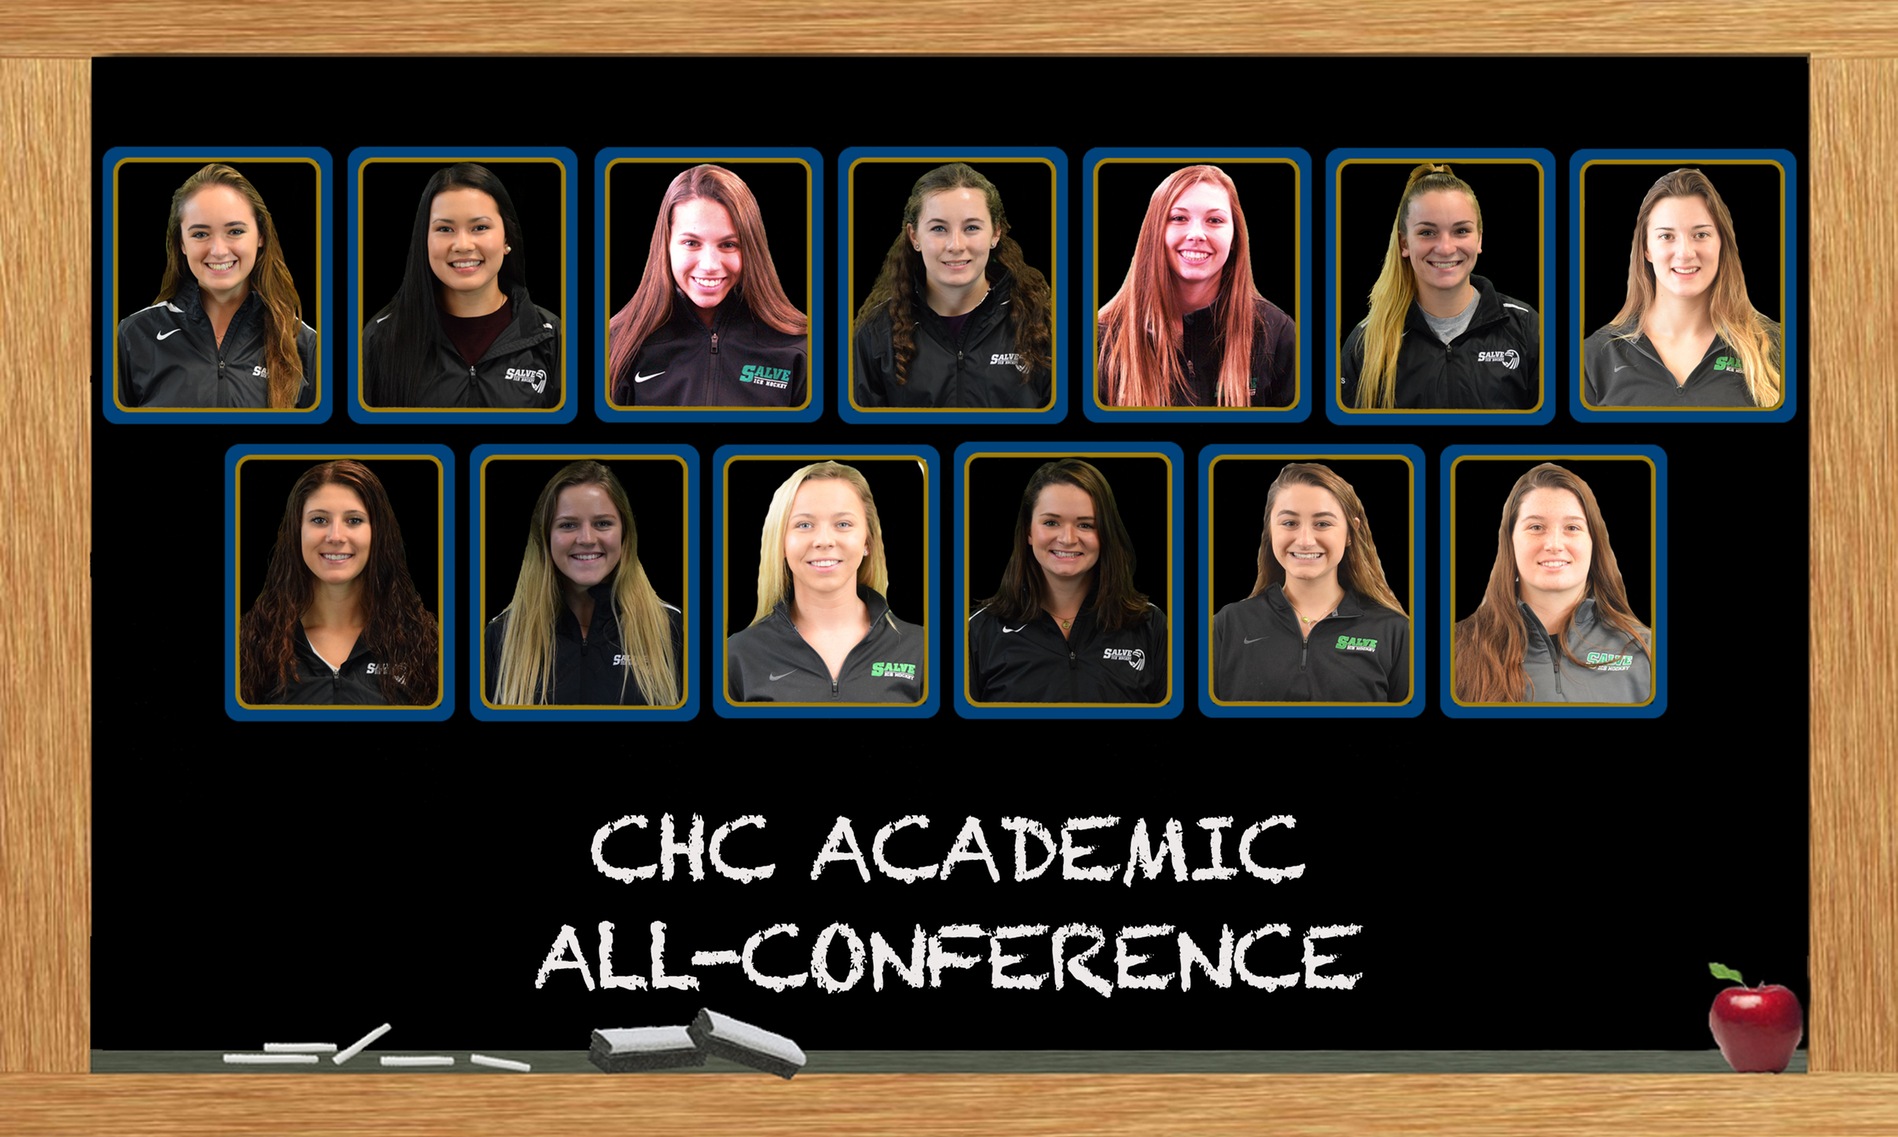 13 members of the Salve Regina women's ice hockey team made the CHC Academic All-Conference squad.